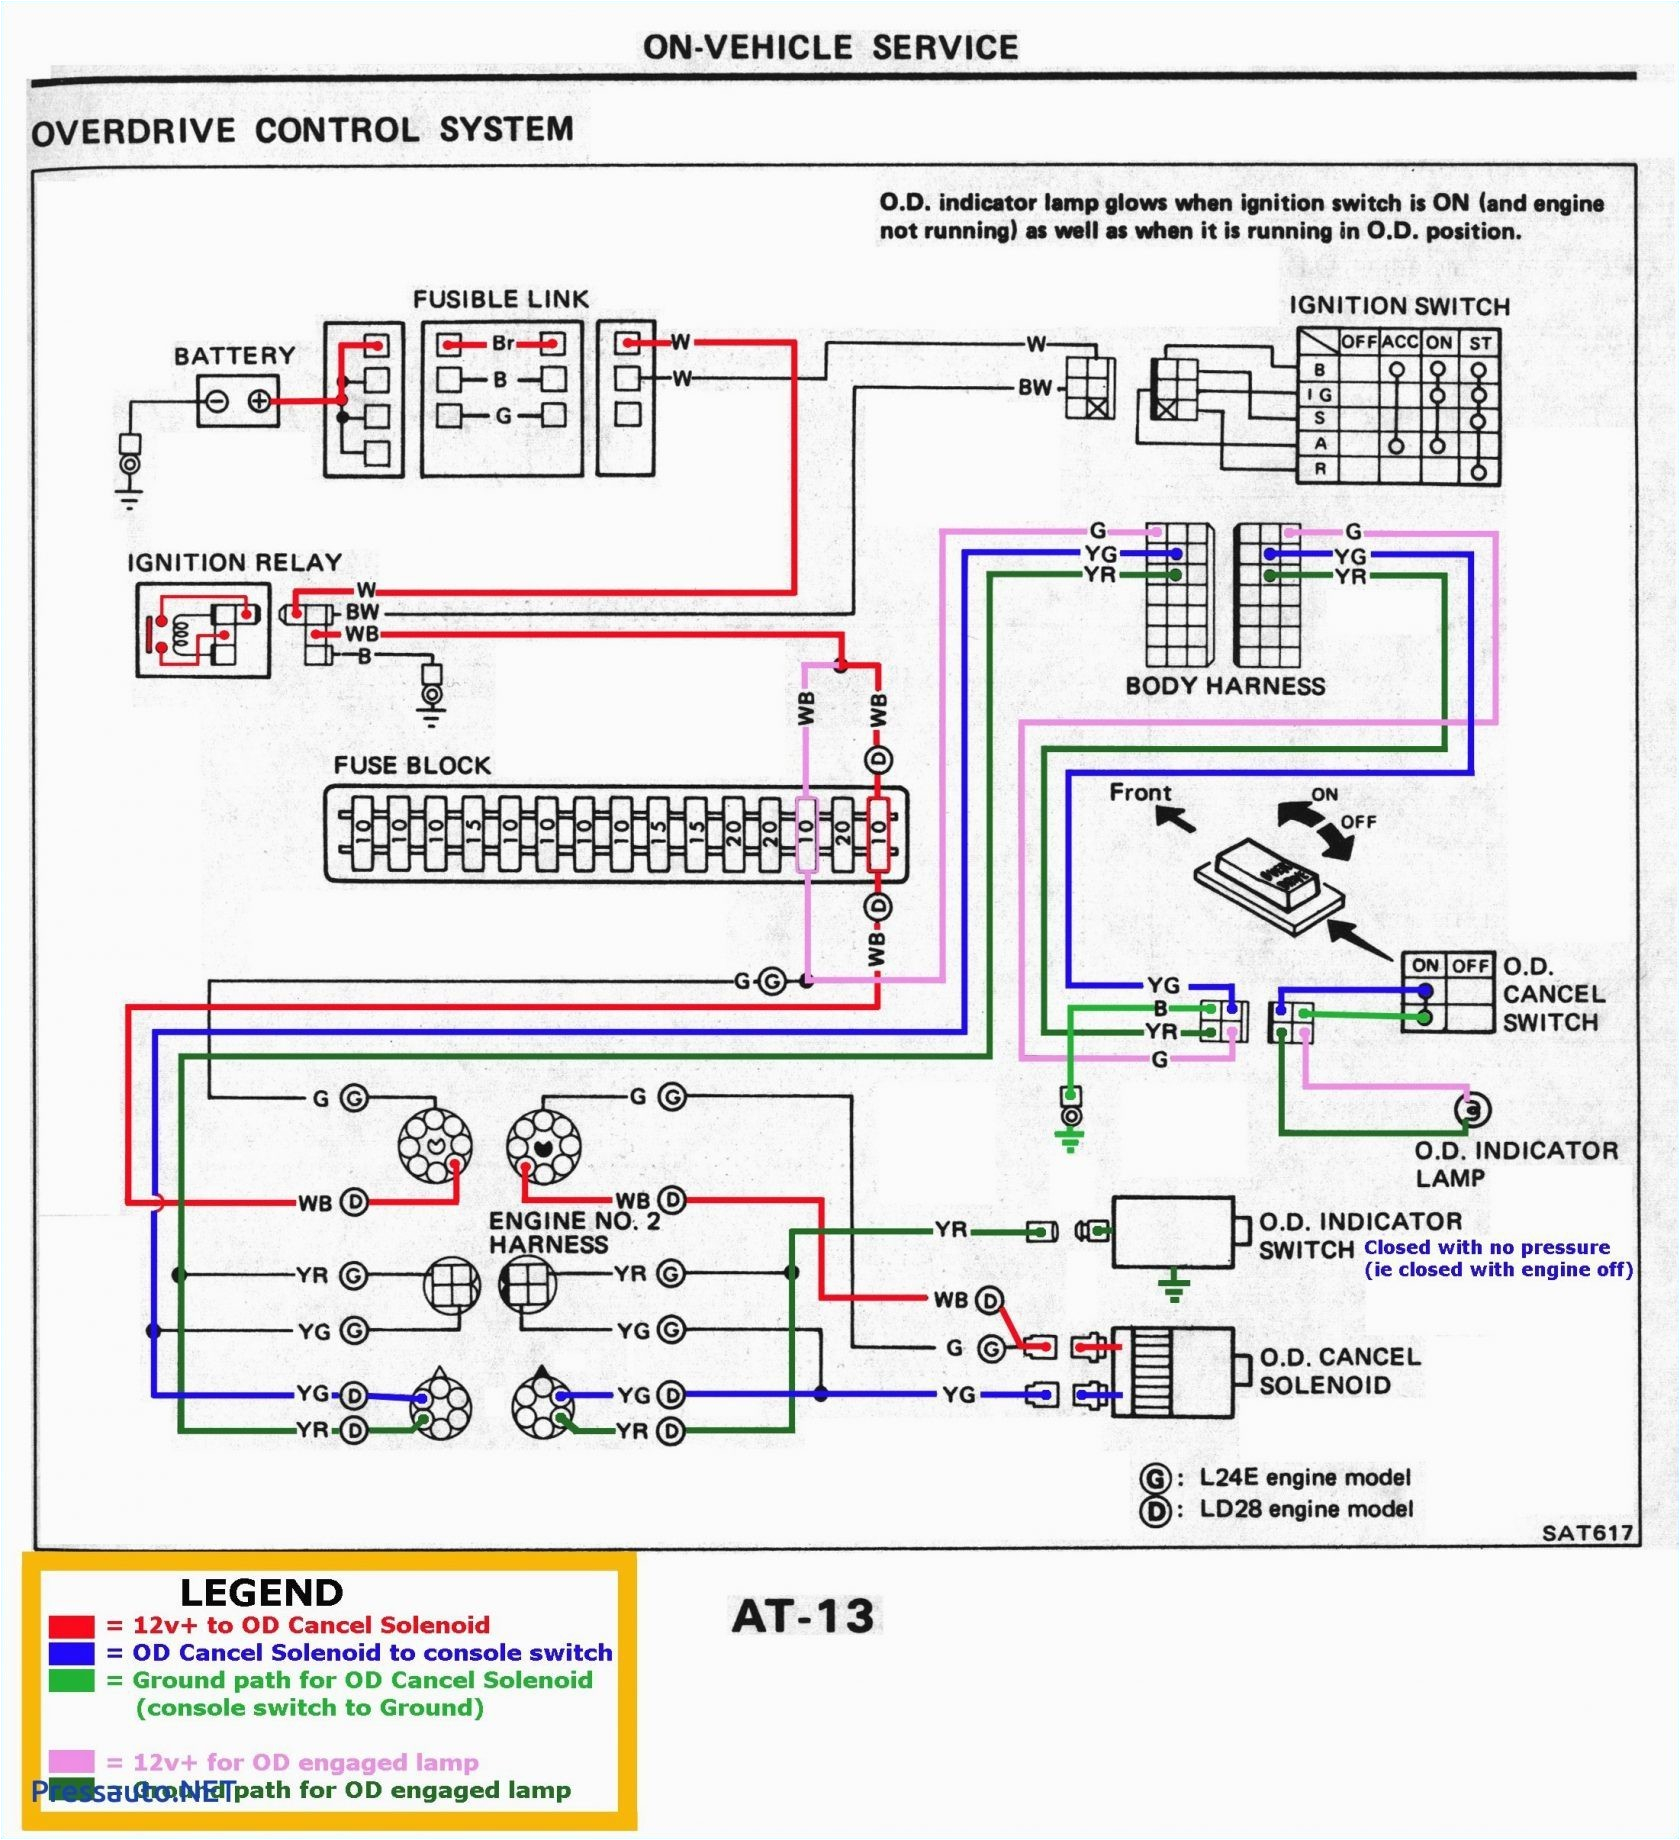 Home Fuse Box Wiring Diagram Fuse Box Wiring Color Home Wiring Diagram